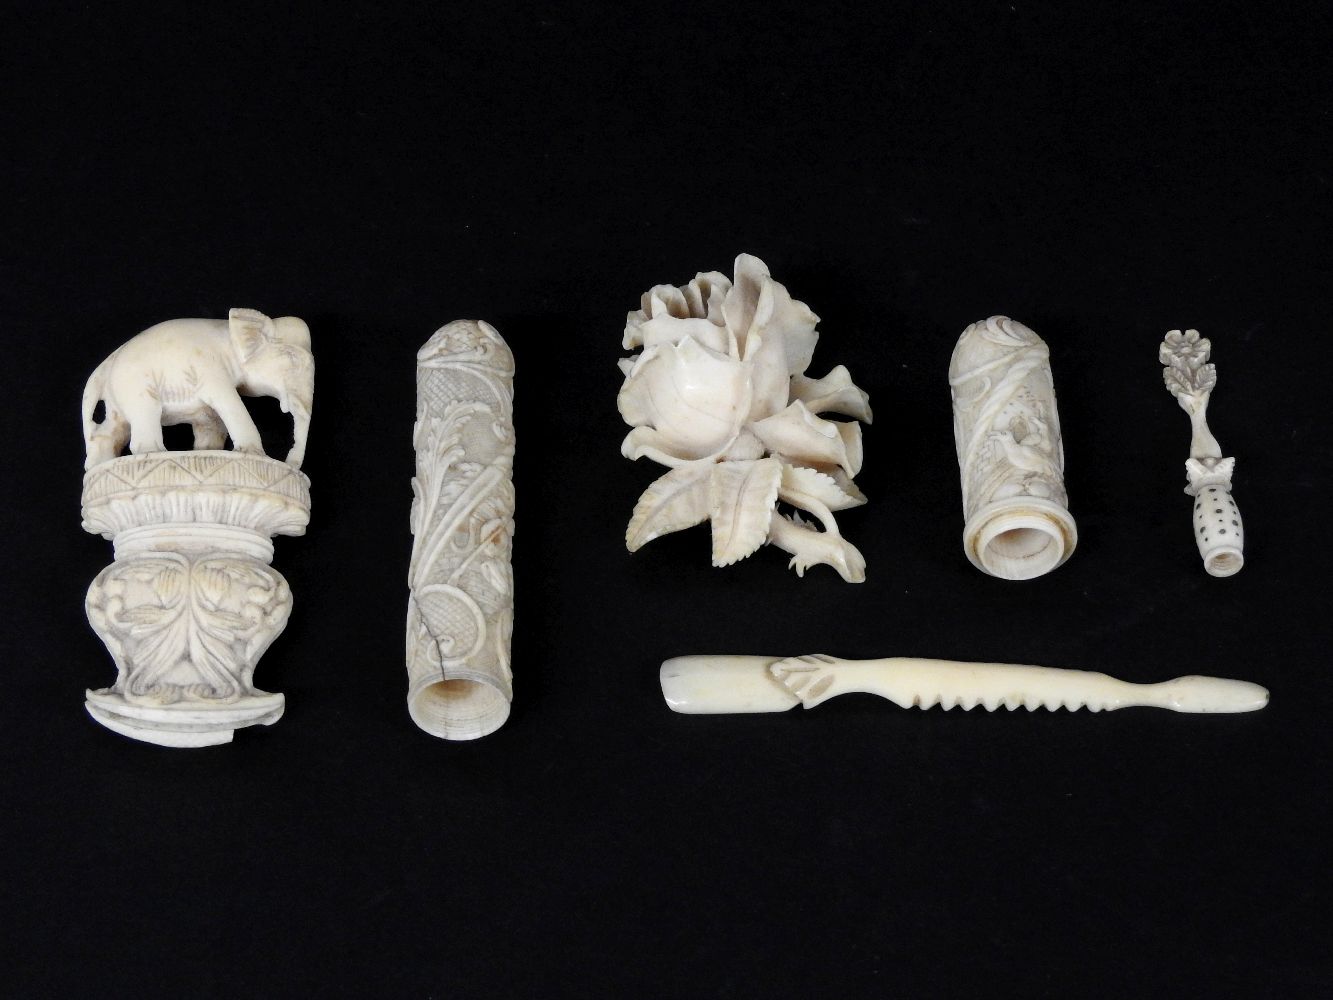 A collection of 19th century ivory items, to include a needle case, a rose brooch, and an elephant